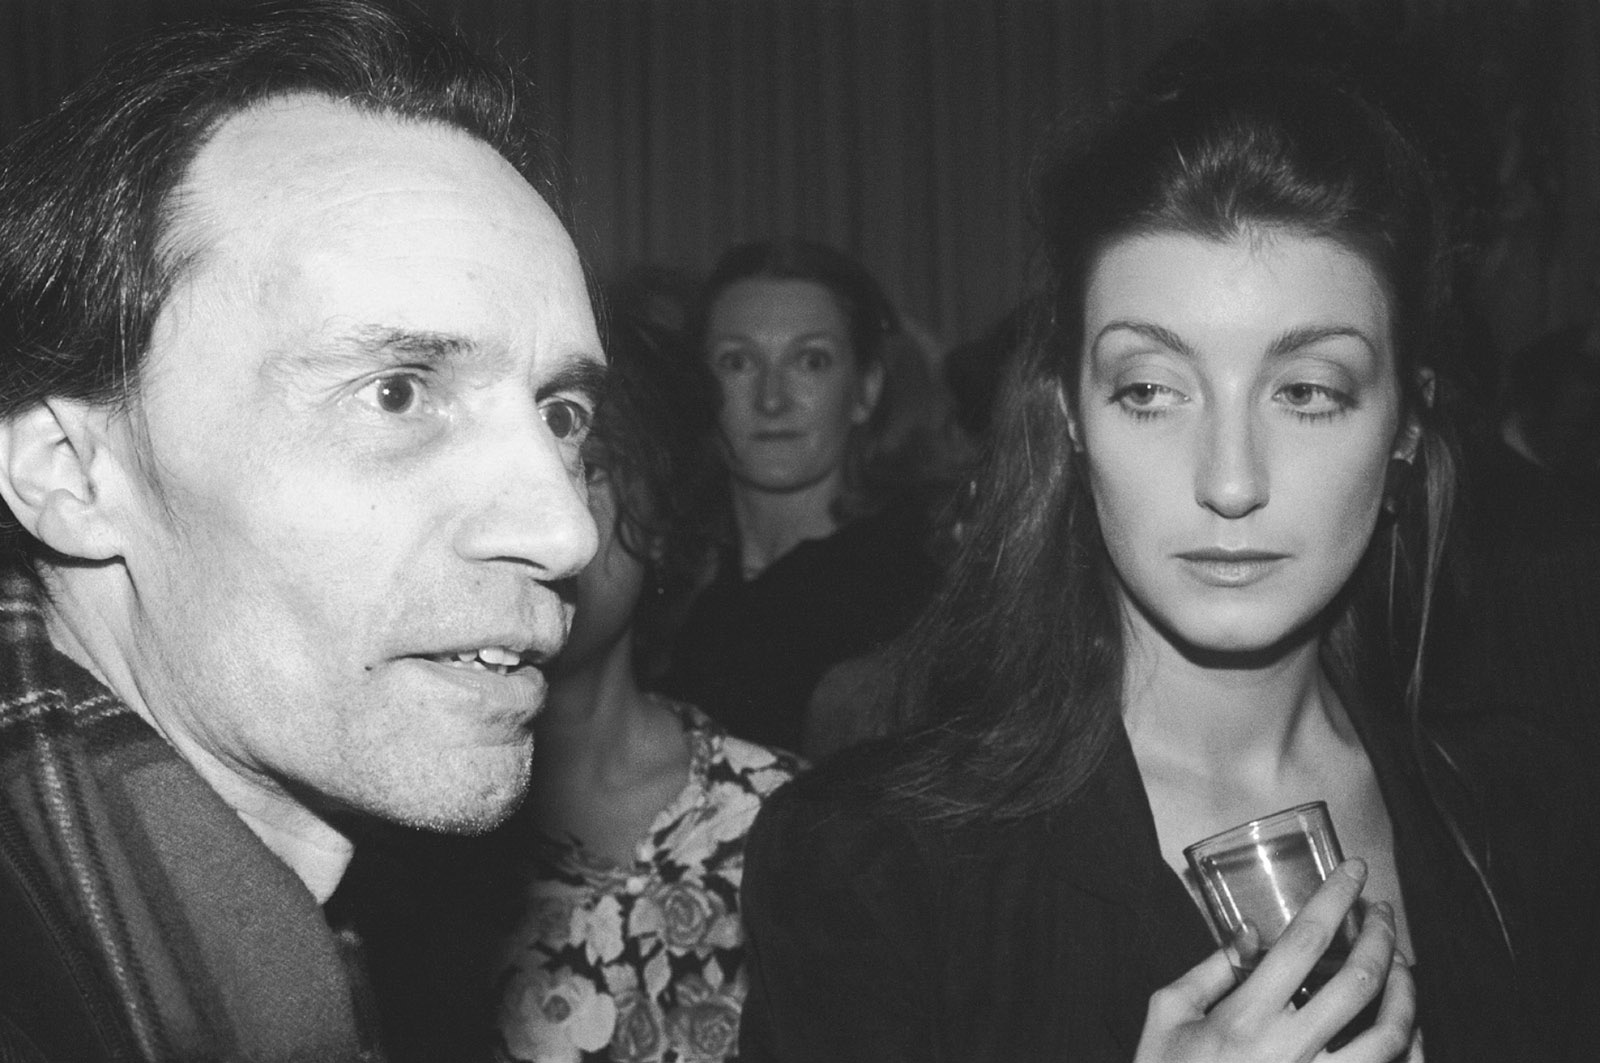 Jacques Rivette and Pascale Ogier, who starred with her mother, Bulle Ogier, in Rivette’s film Le Pont du Nord, New York City, 1981